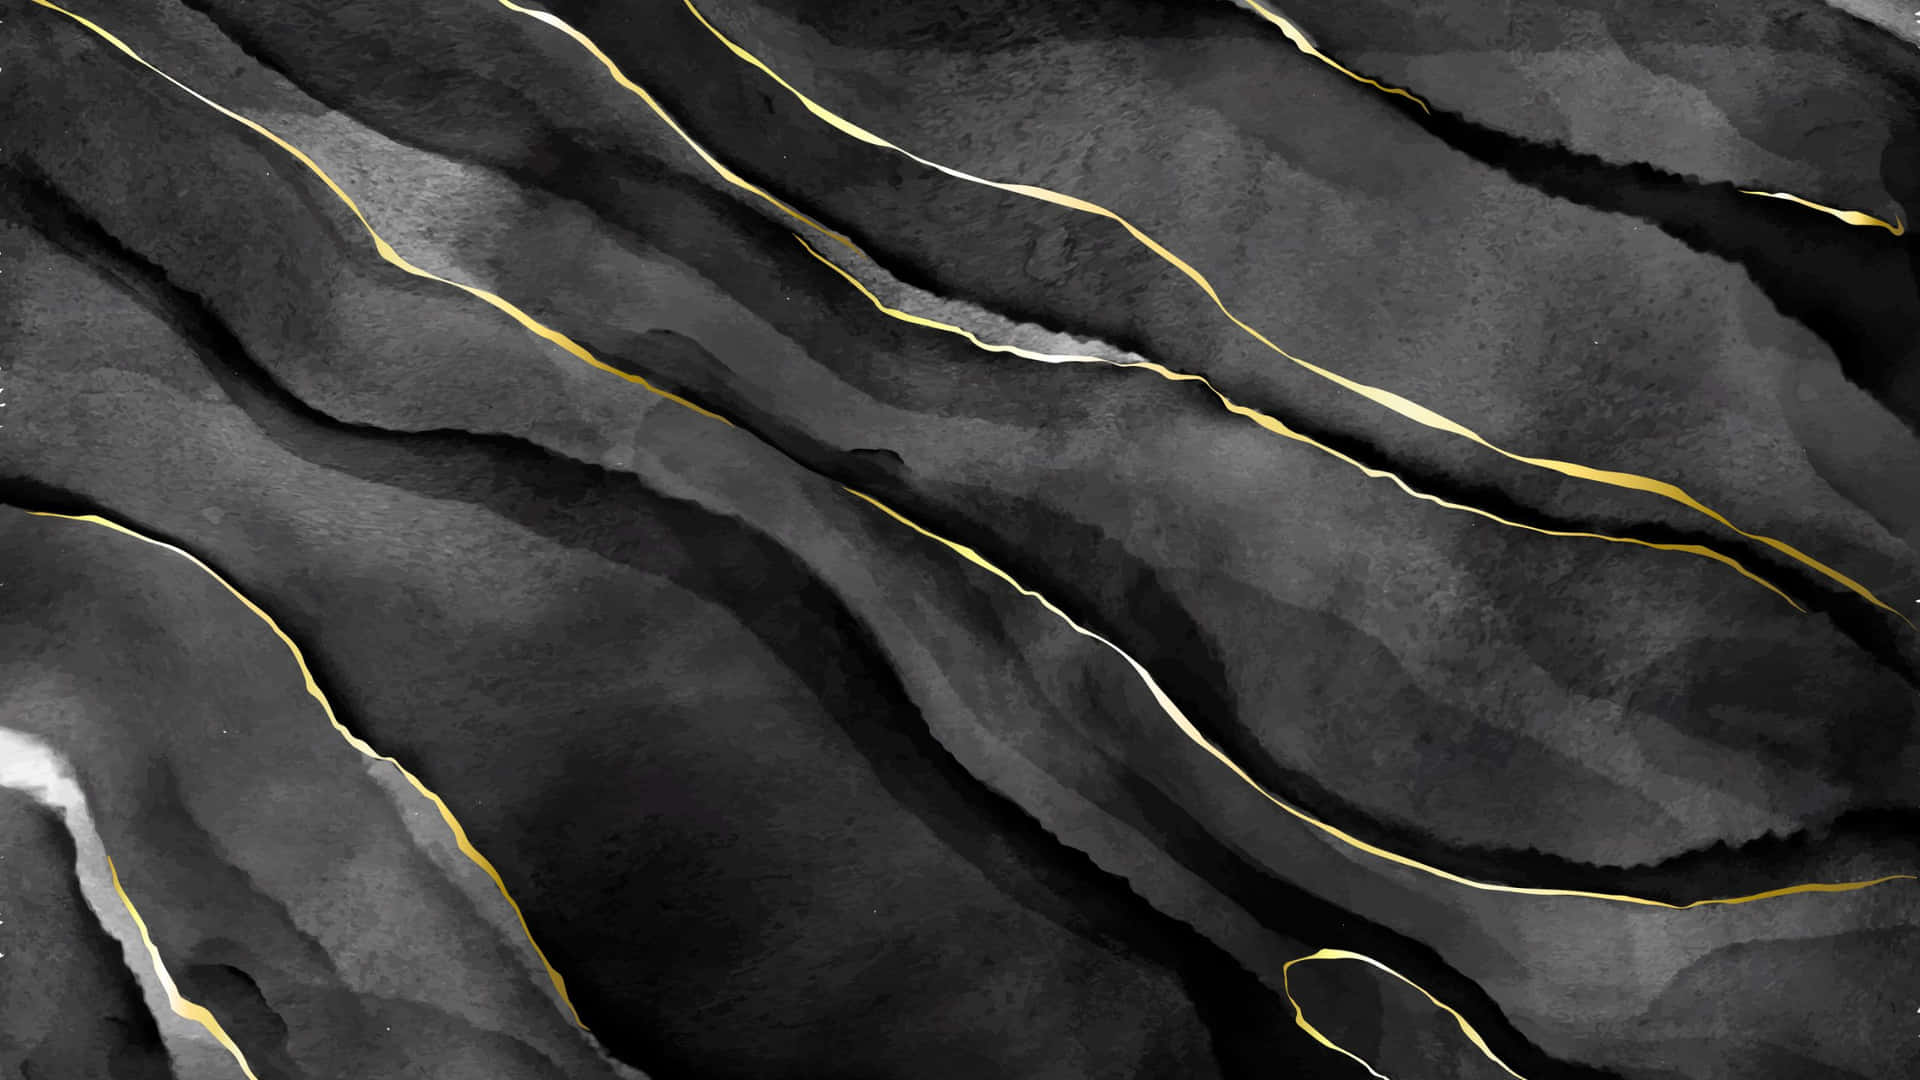 Splendid Glossy Black And Gold Marble Texture Wallpaper